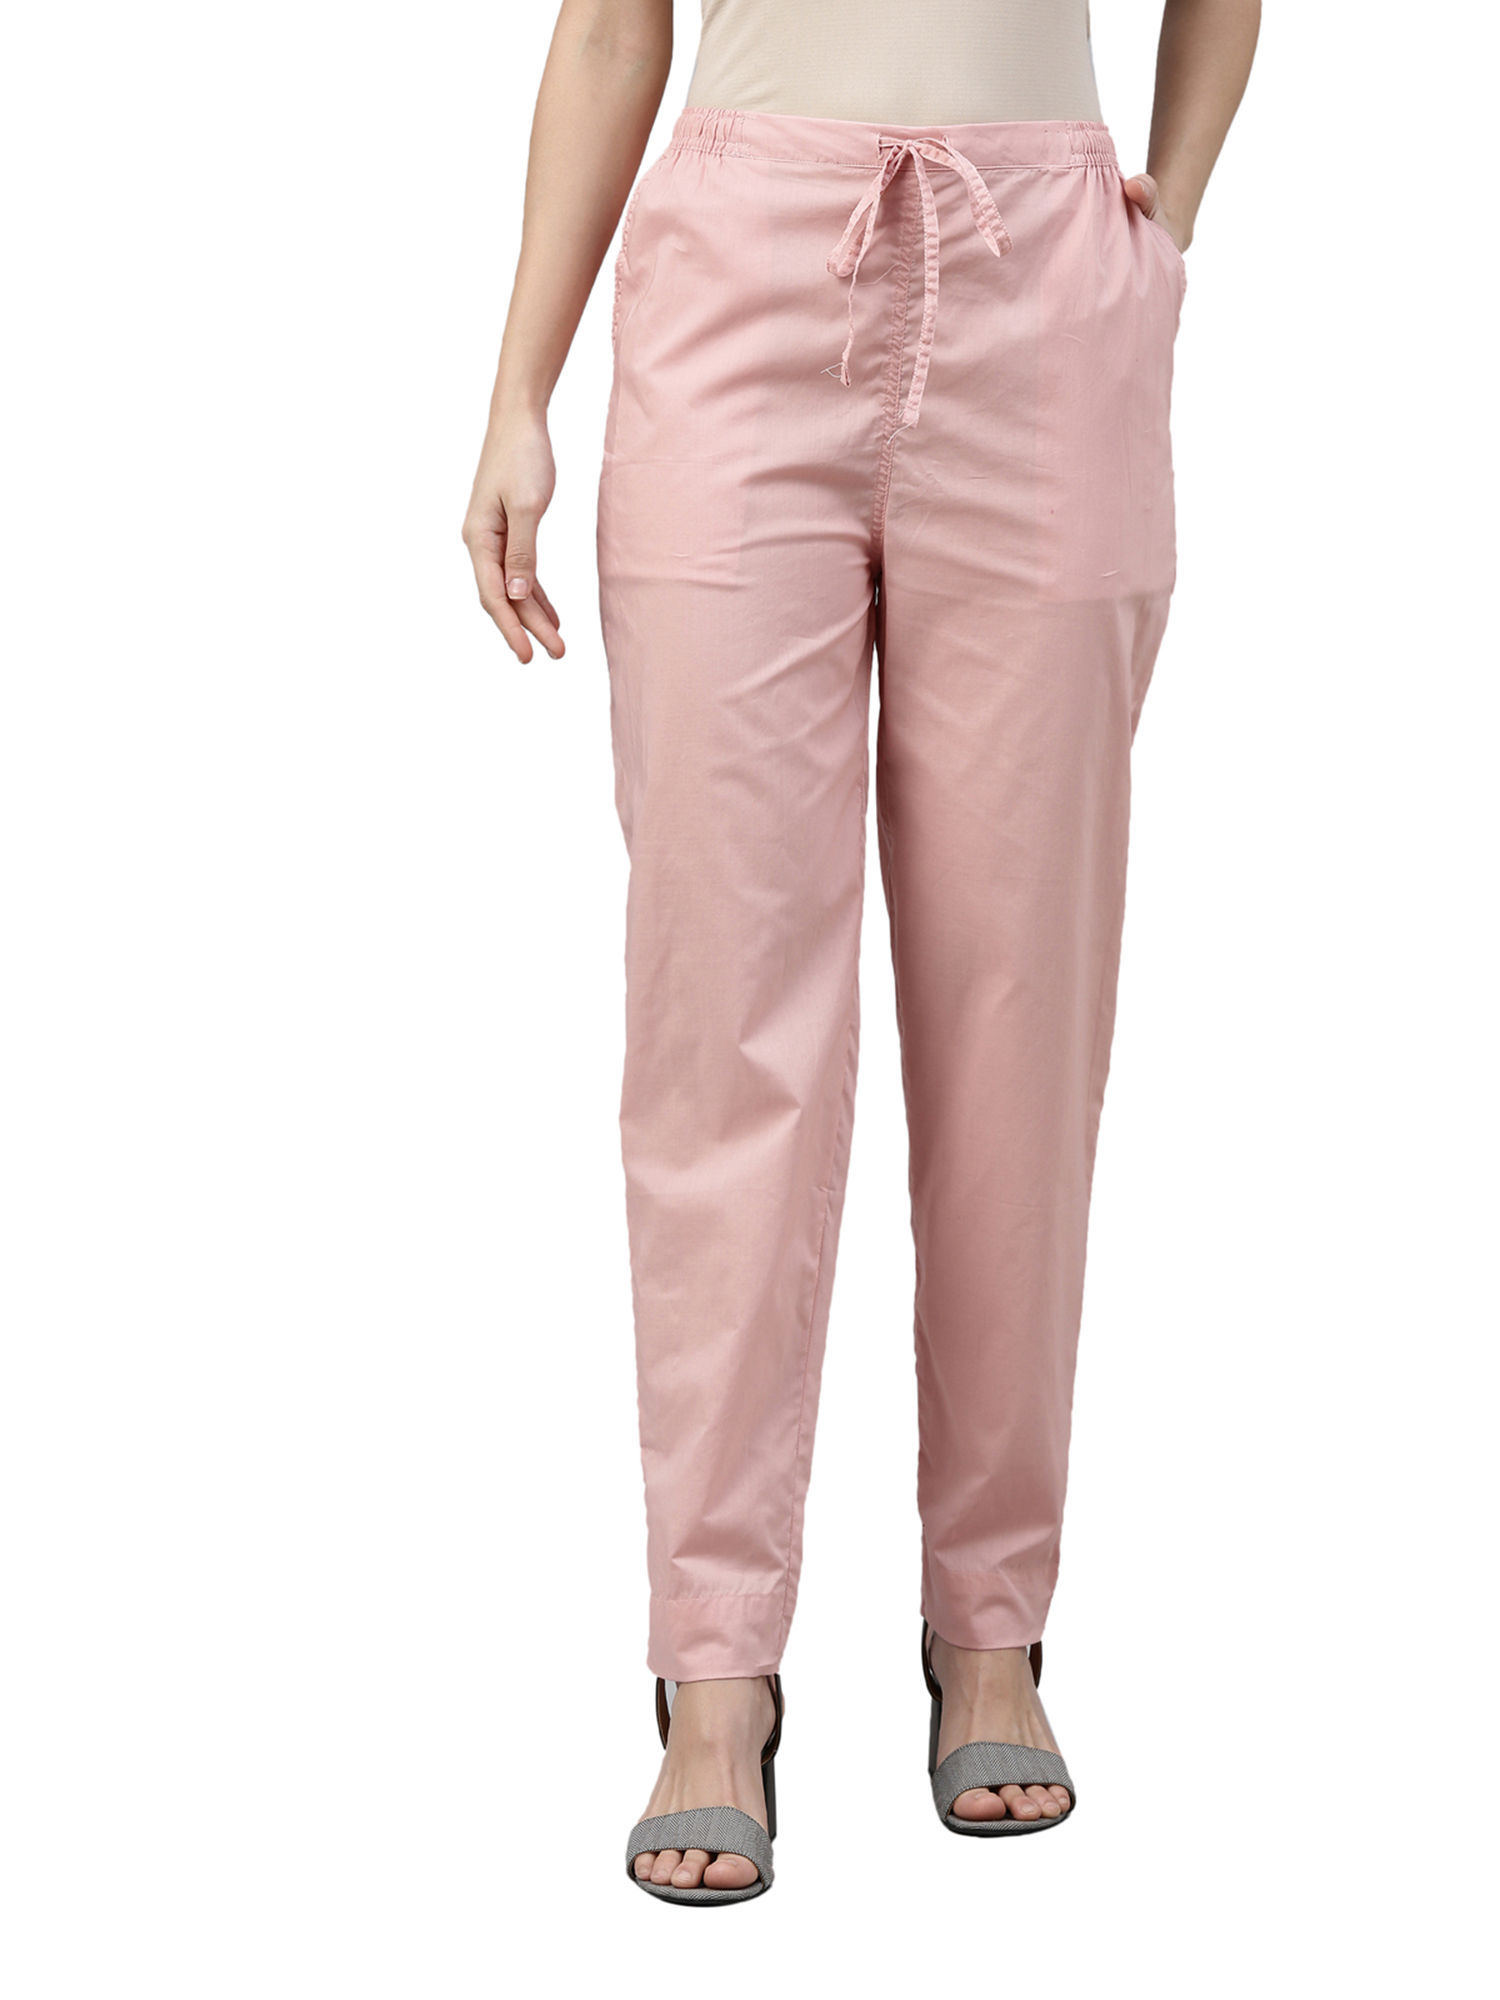 Buy Pink Handcrafted Cotton Pants for Women  FGPT2220  Farida Gupta